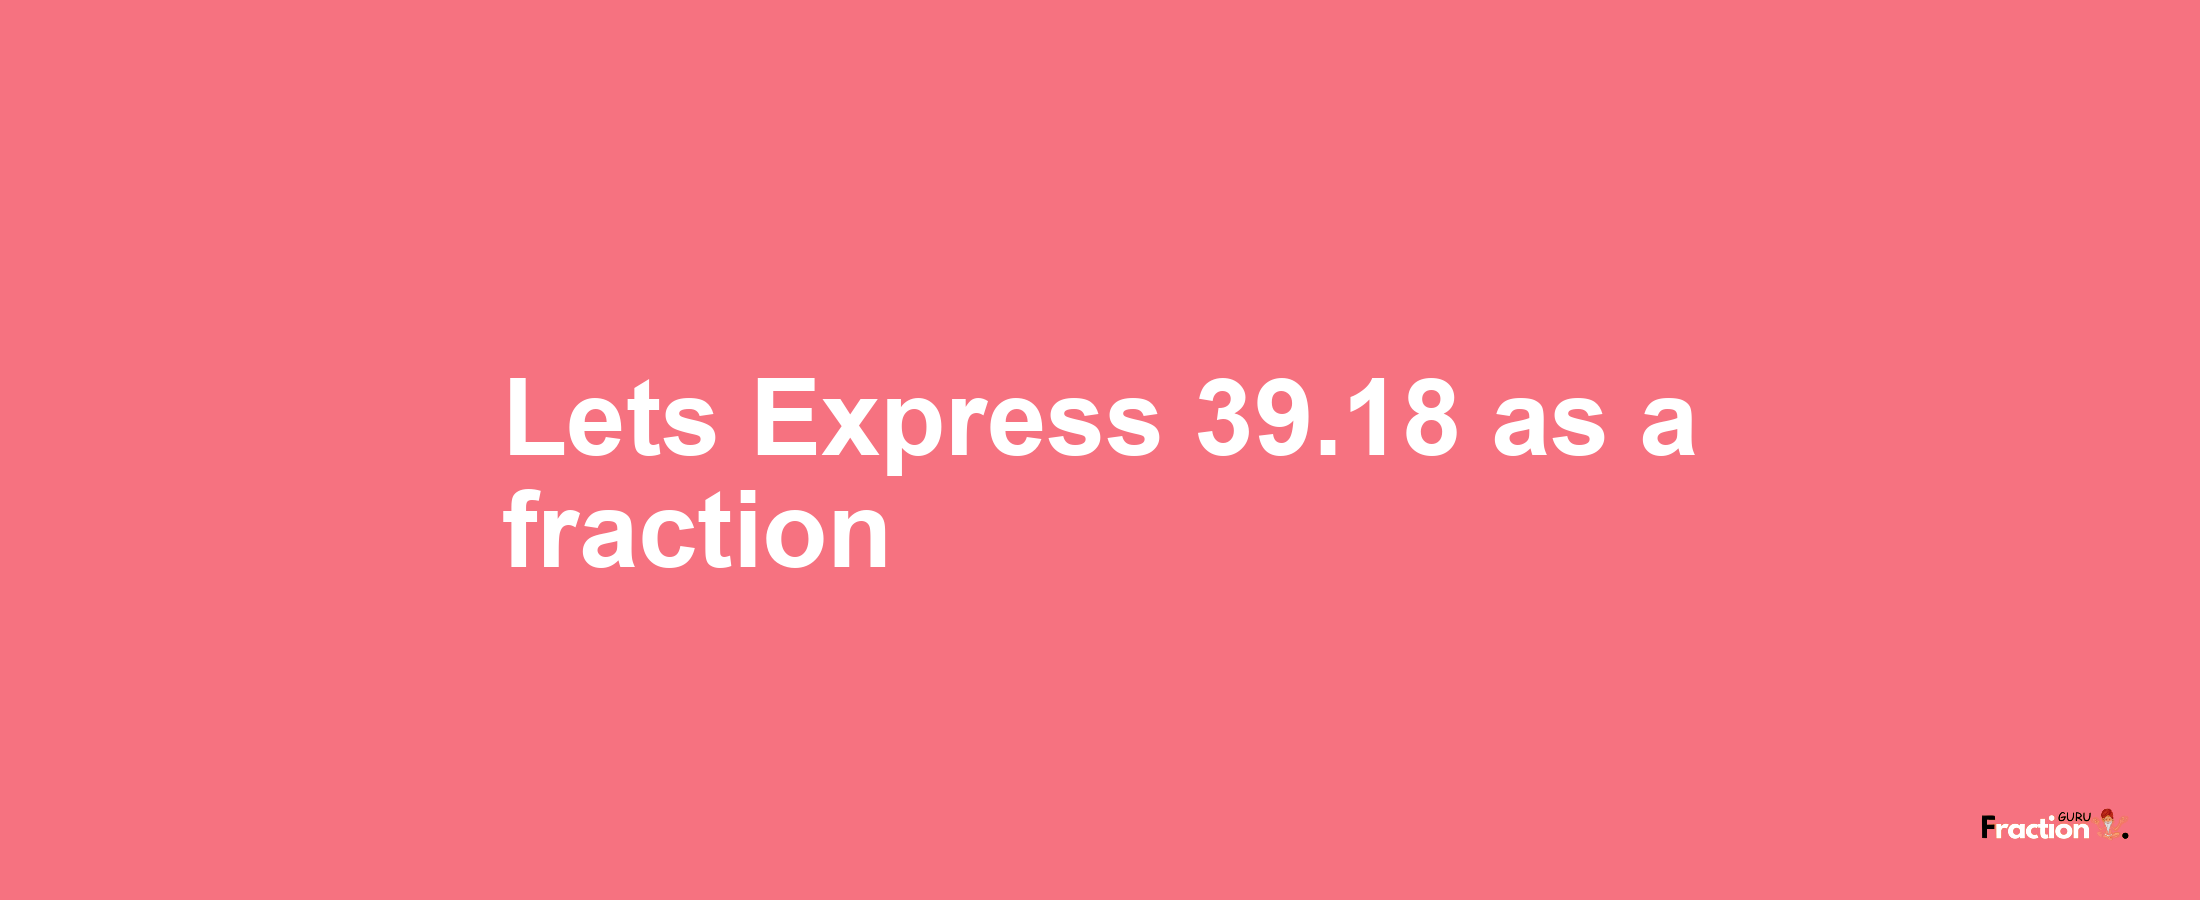 Lets Express 39.18 as afraction